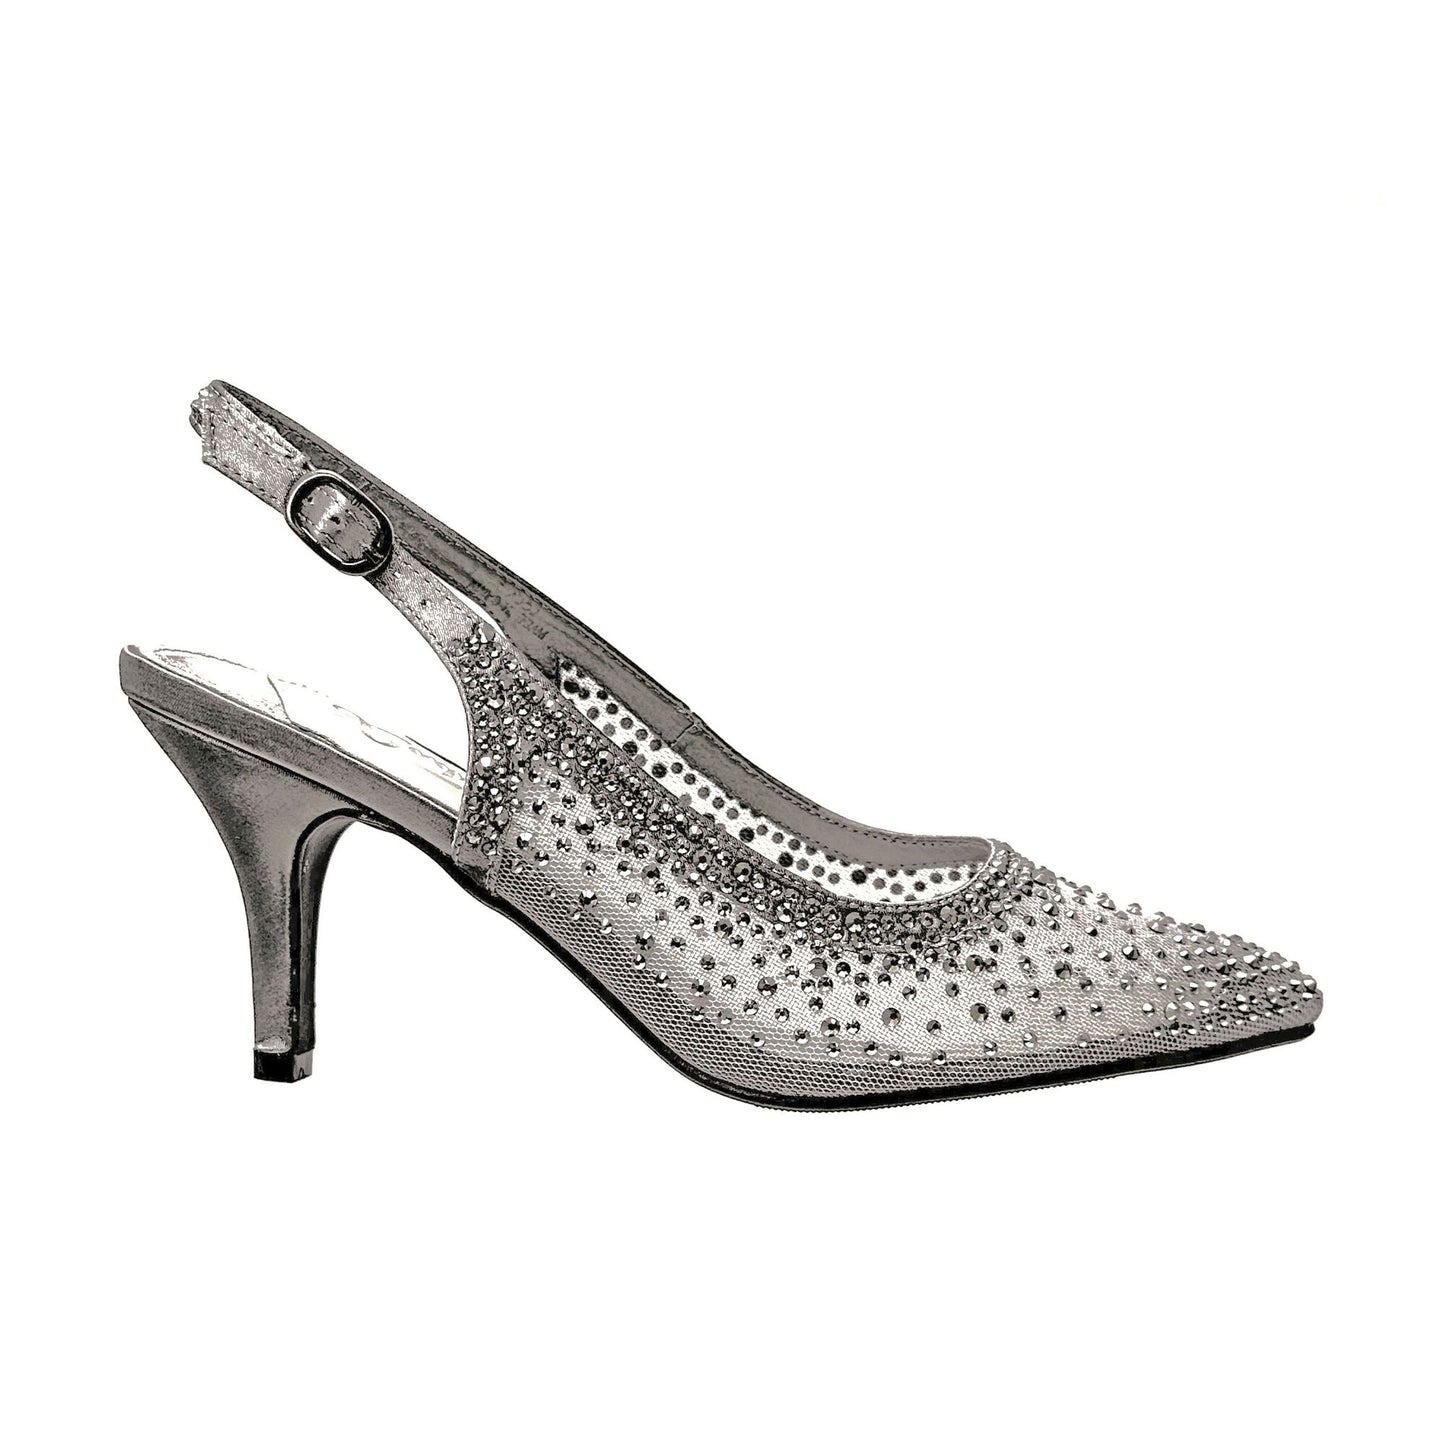 Lady Couture LOLA Embellished Pointed Toe Slingback Pump